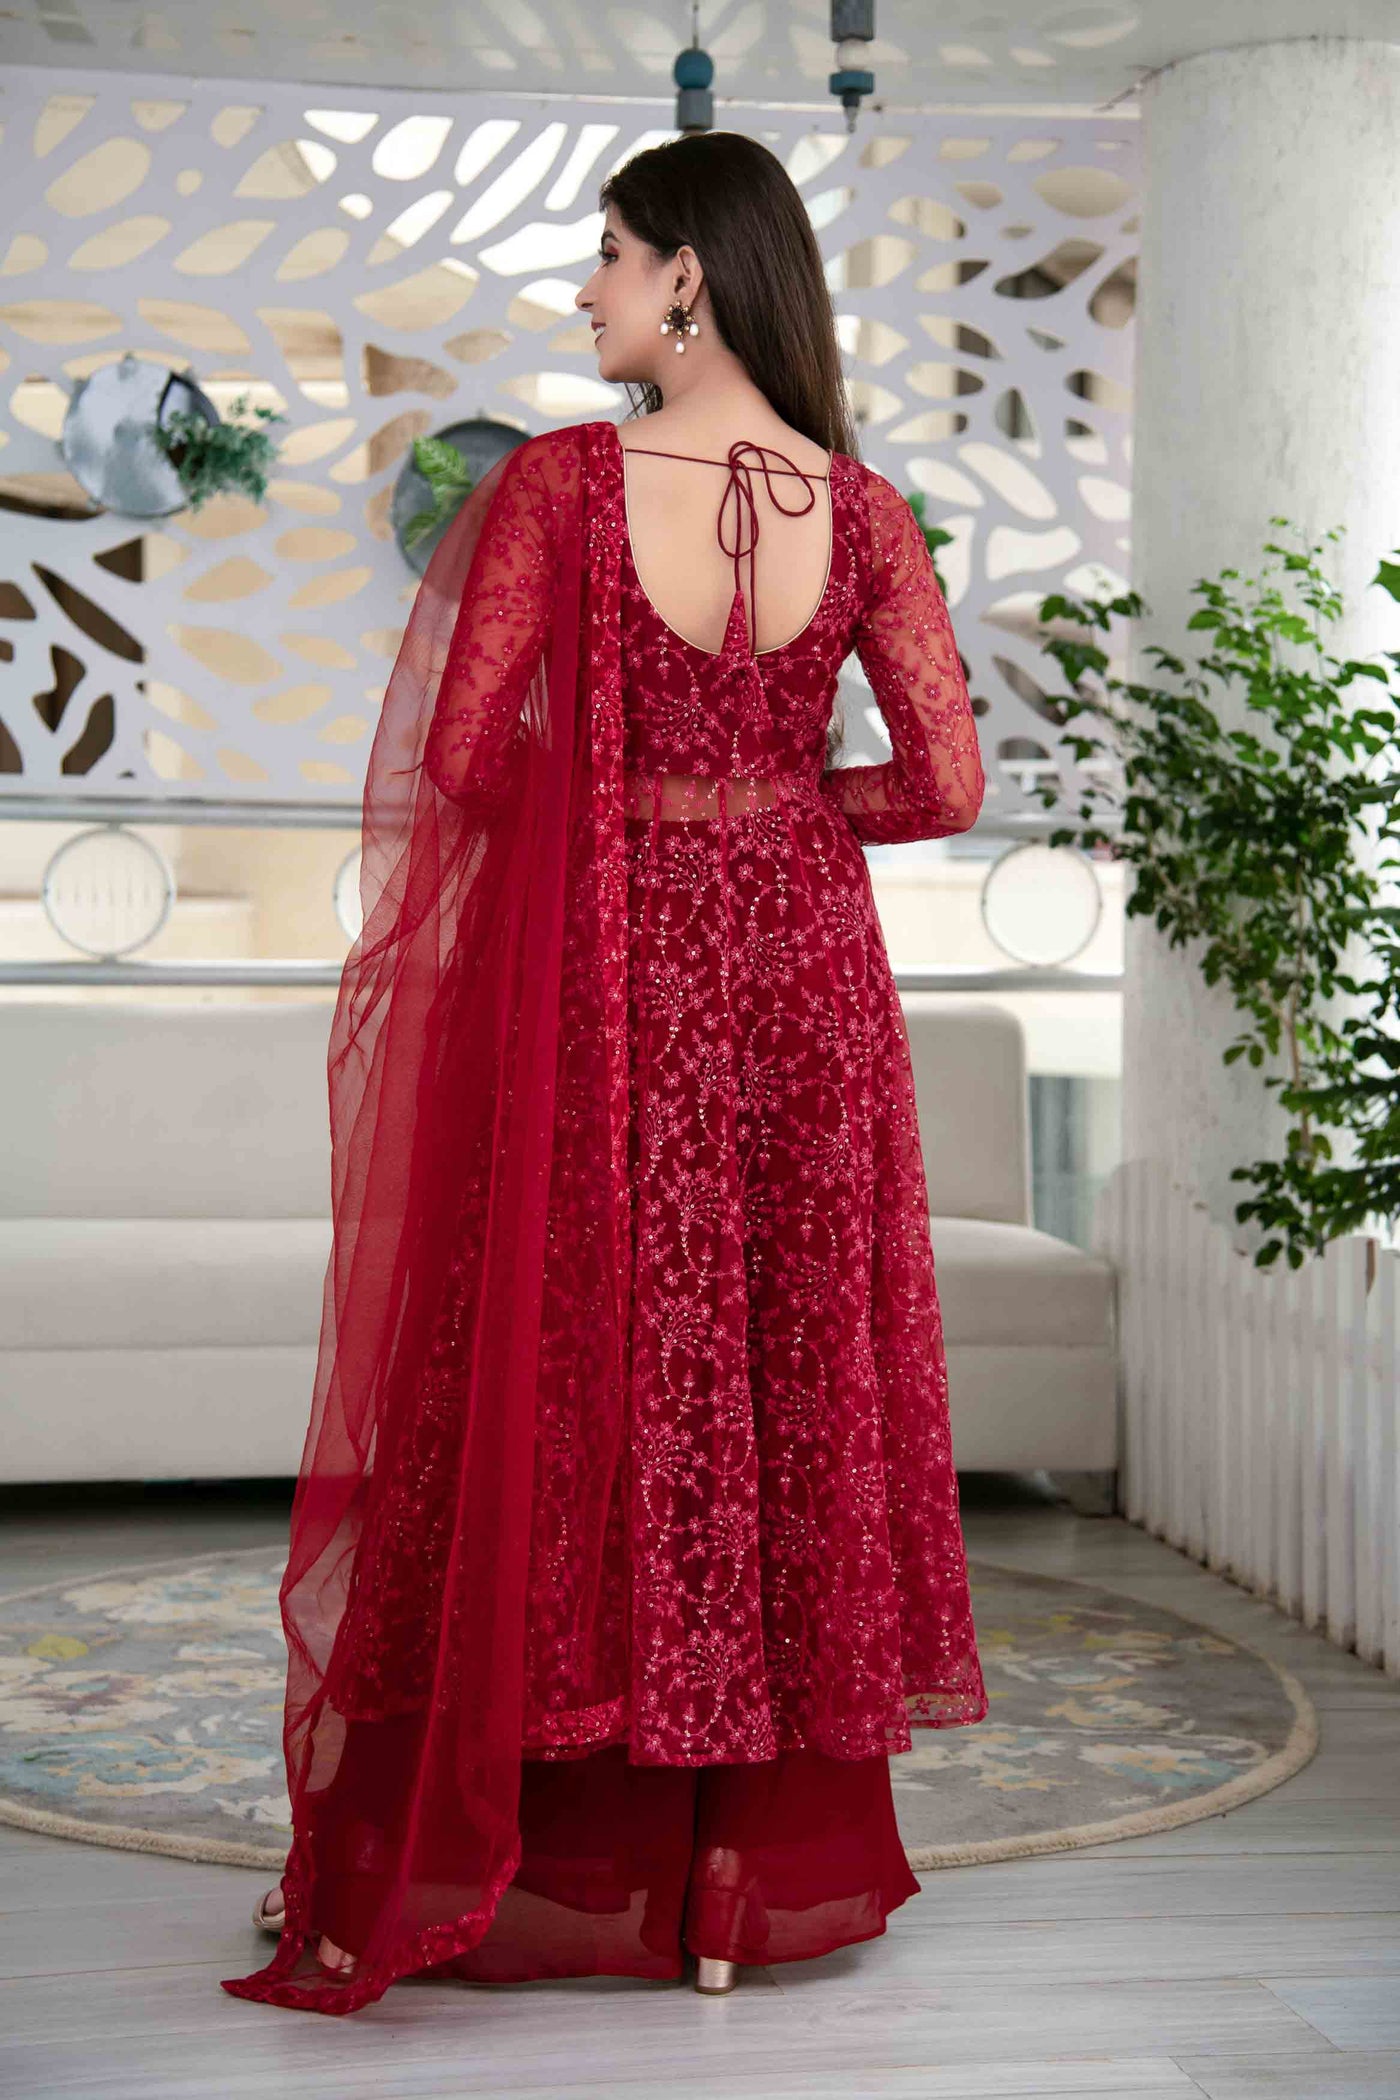 Women's Red Anarkali Suit Set With Palazzo With Net Dupatta - Label Shaurya  Sanadhya | Red anarkali, Indian fashion dresses, Red anarkali suits